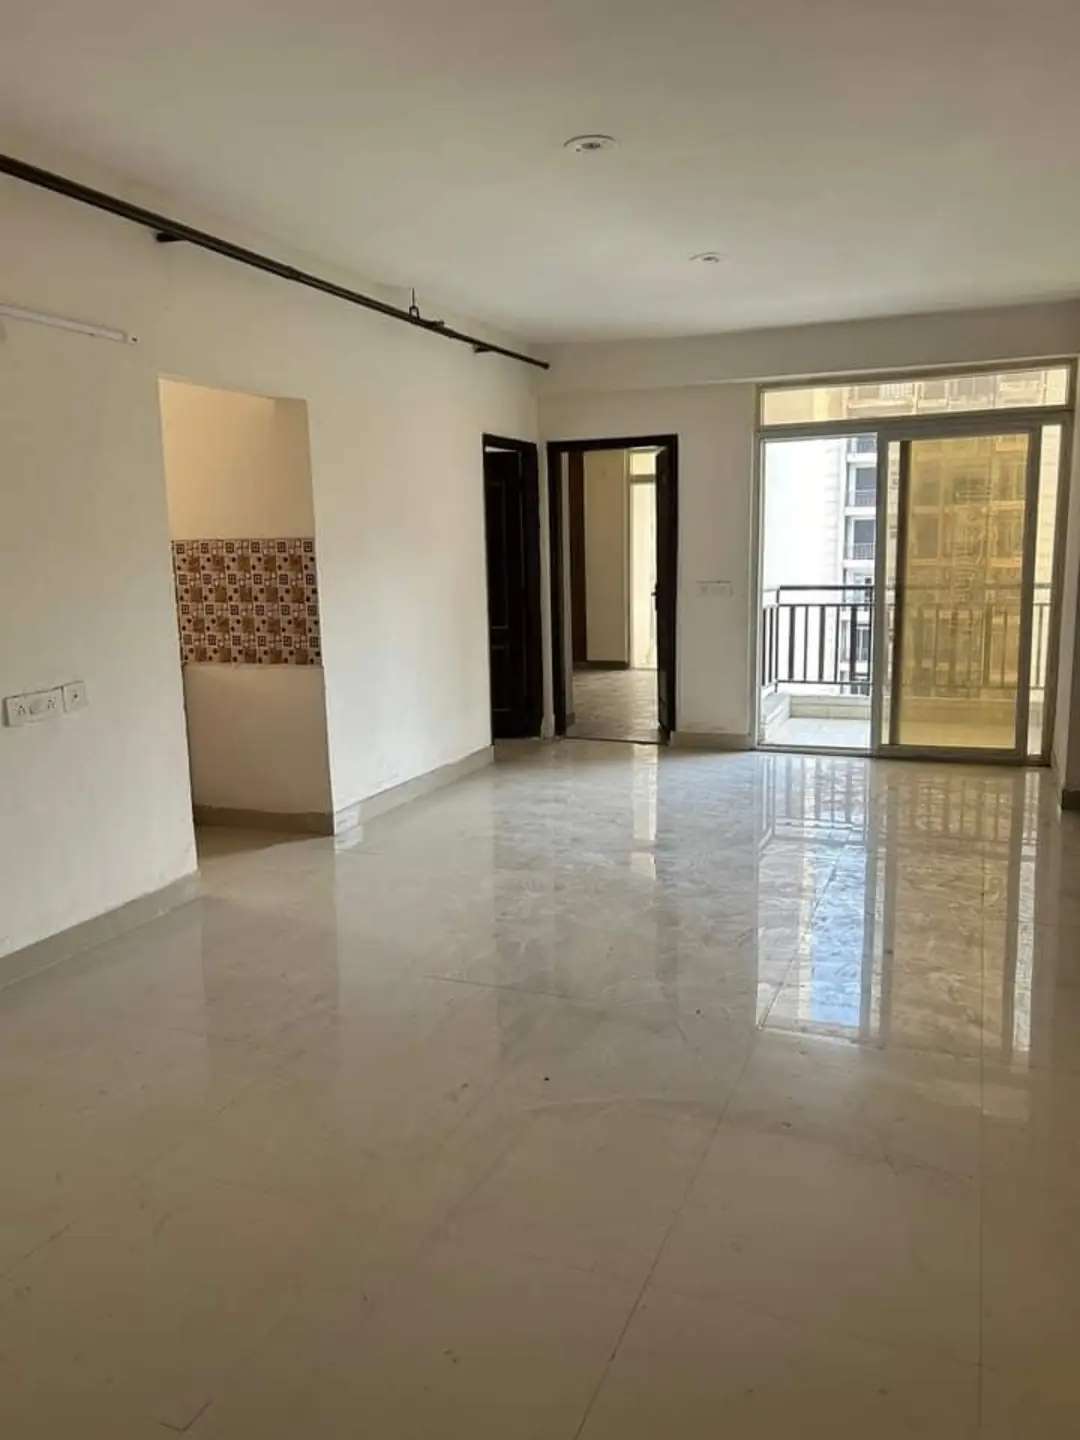 3 Bed/ 3 Bath Sell Apartment/ Flat; 1,440 sq. ft. carpet area; Ready To Move for sale @Gaur City noida extension 